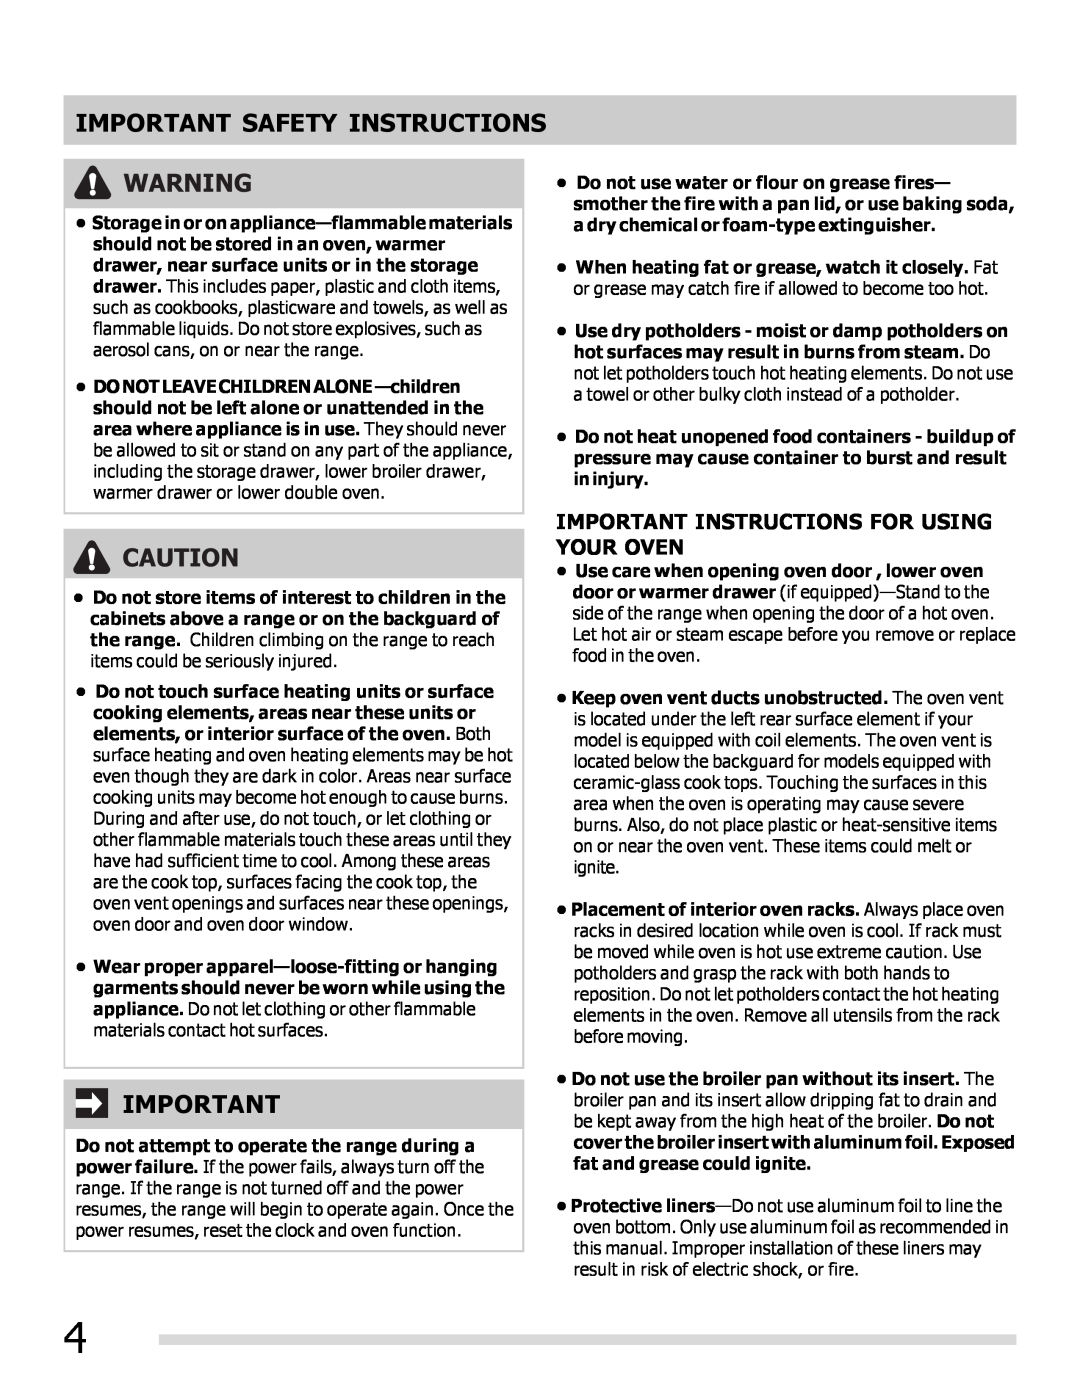 Frigidaire 316902202 Important Instructions For Using Your Oven, Important Safety Instructions 